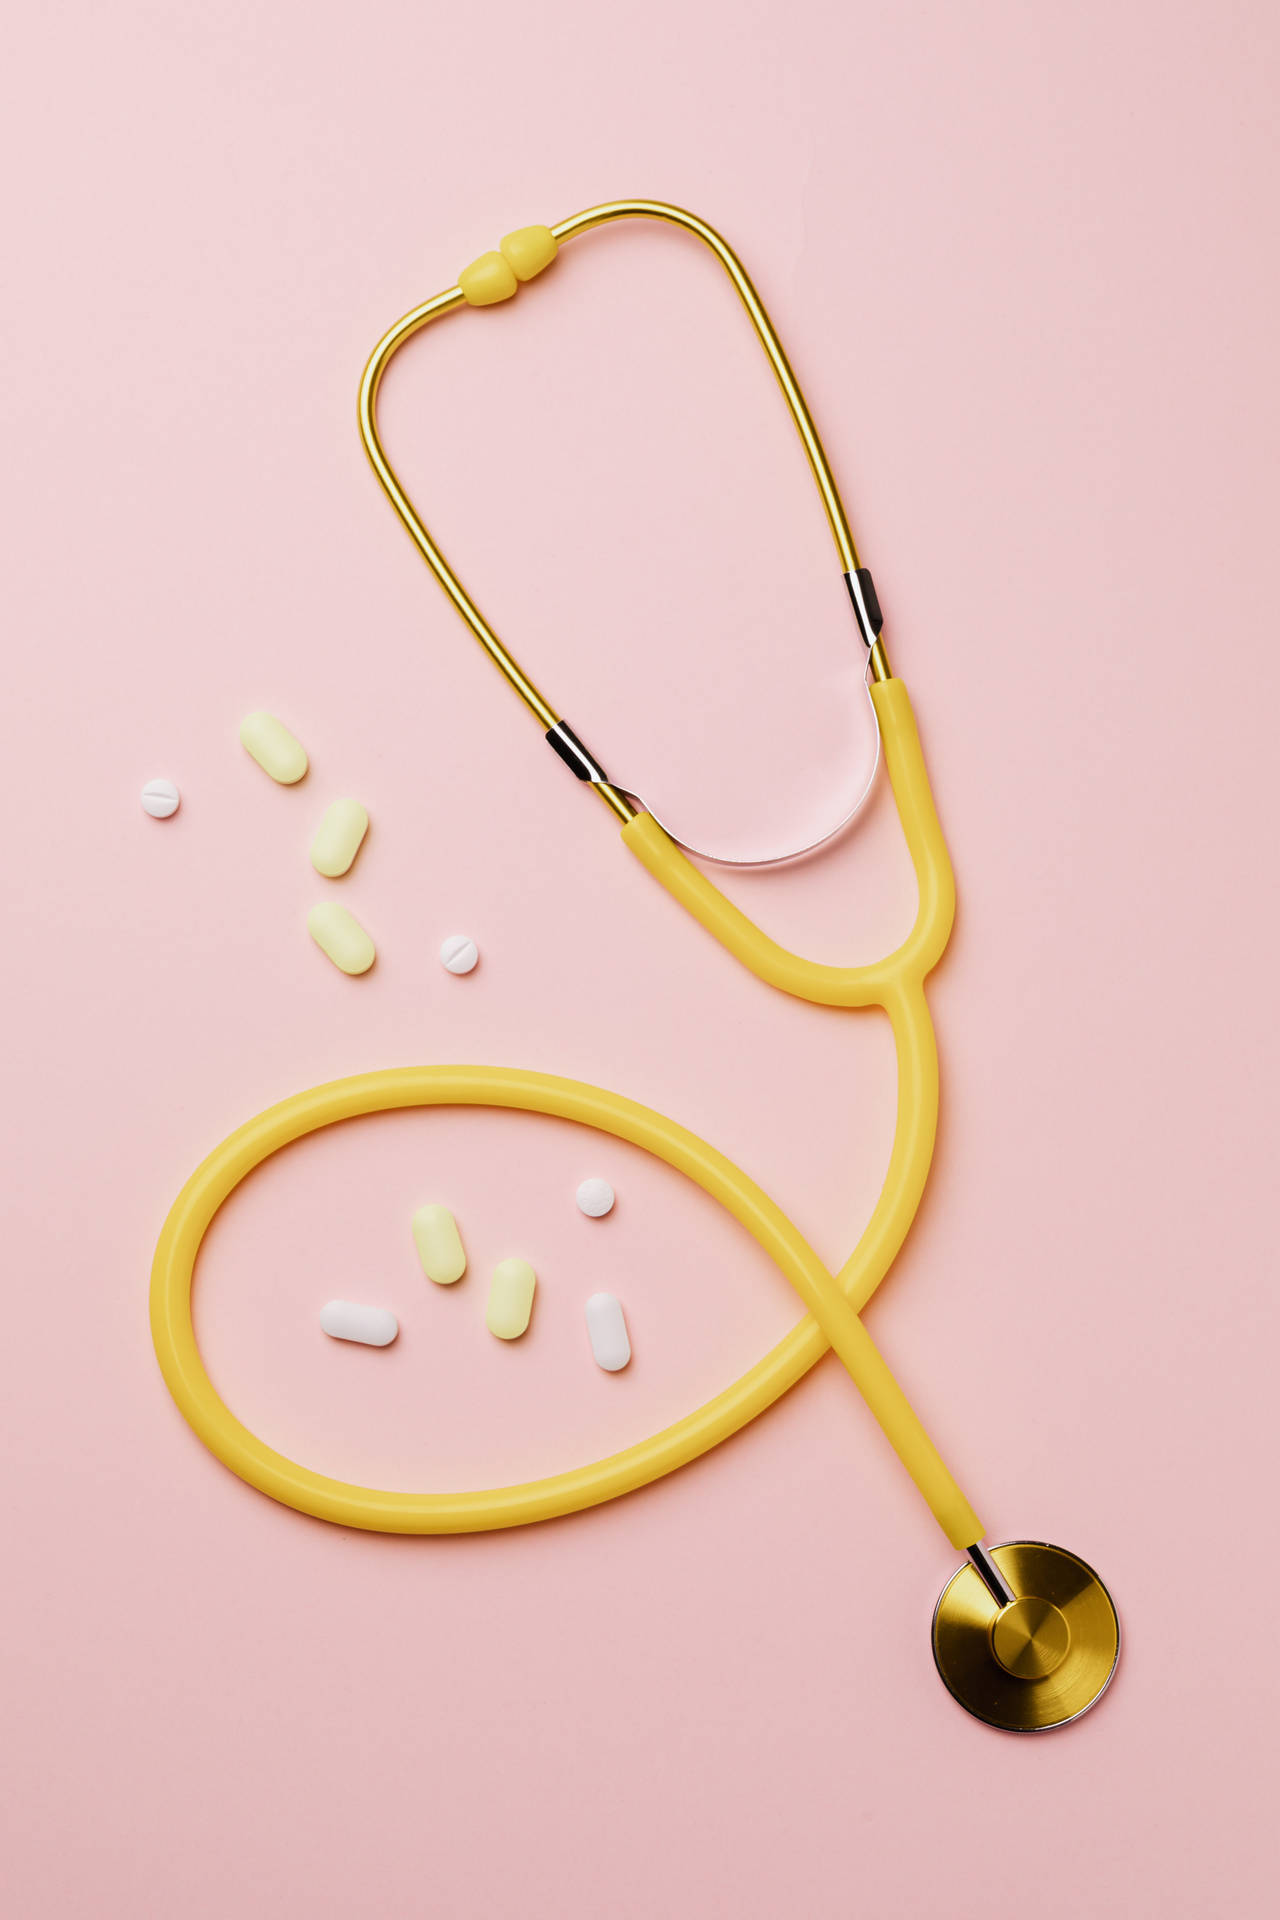 Yellow Stethoscope On Pink Background